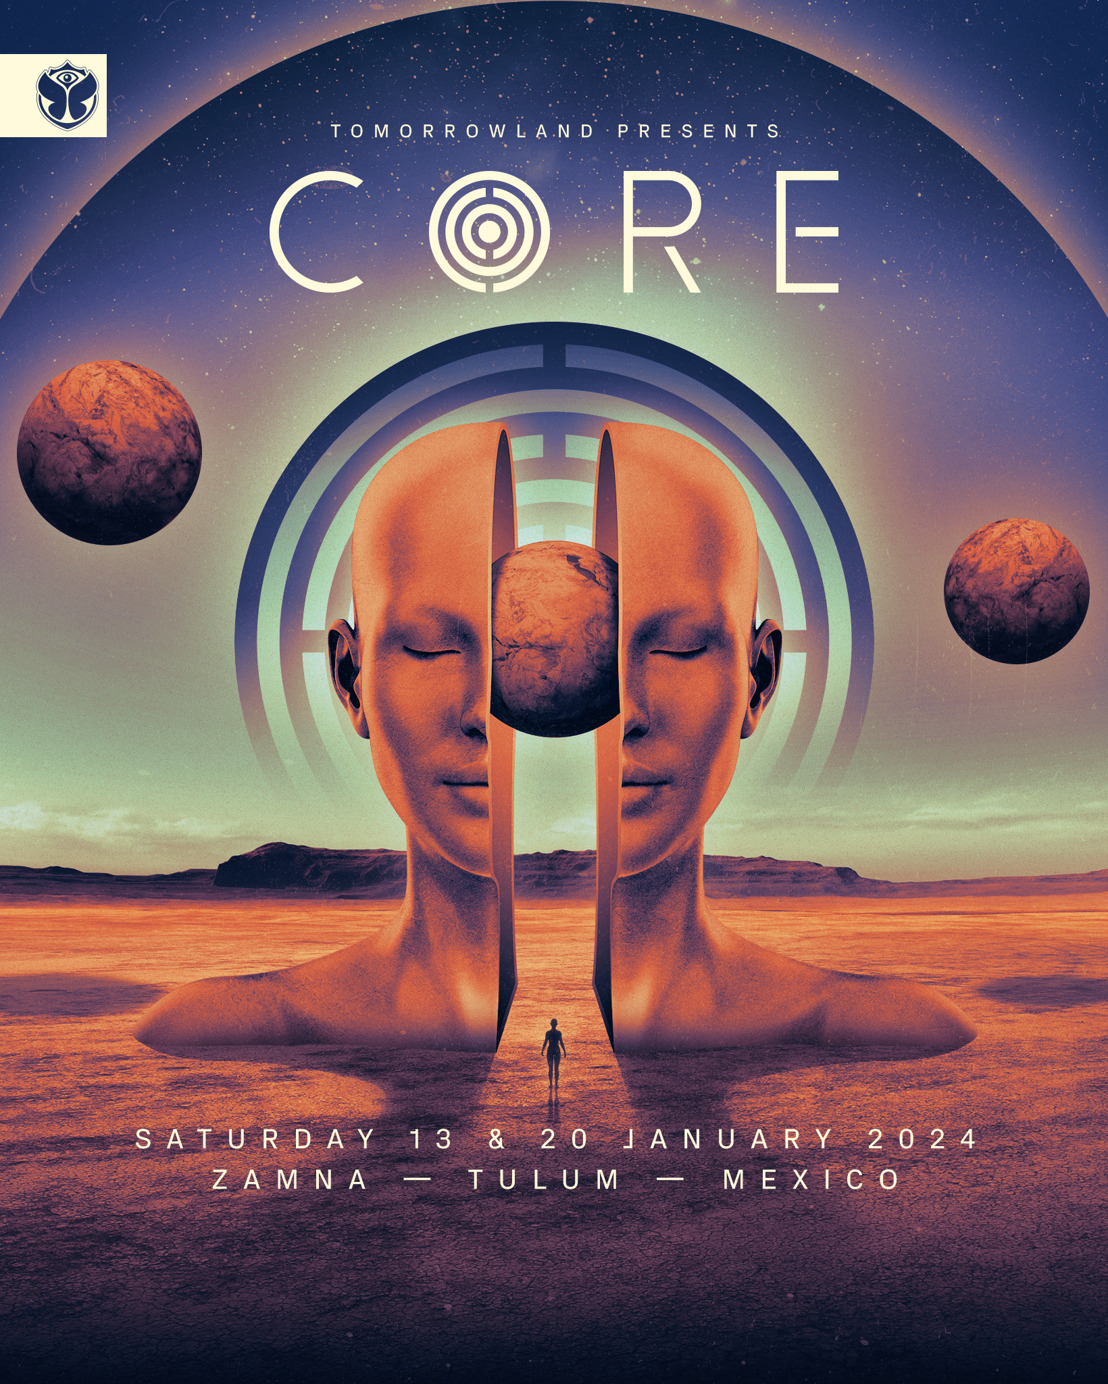 ‘Tomorrowland presents CORE Tulum’ returns for two nights in 2024 with a brand-new CORE stage that will be unveiled to the world for the first time